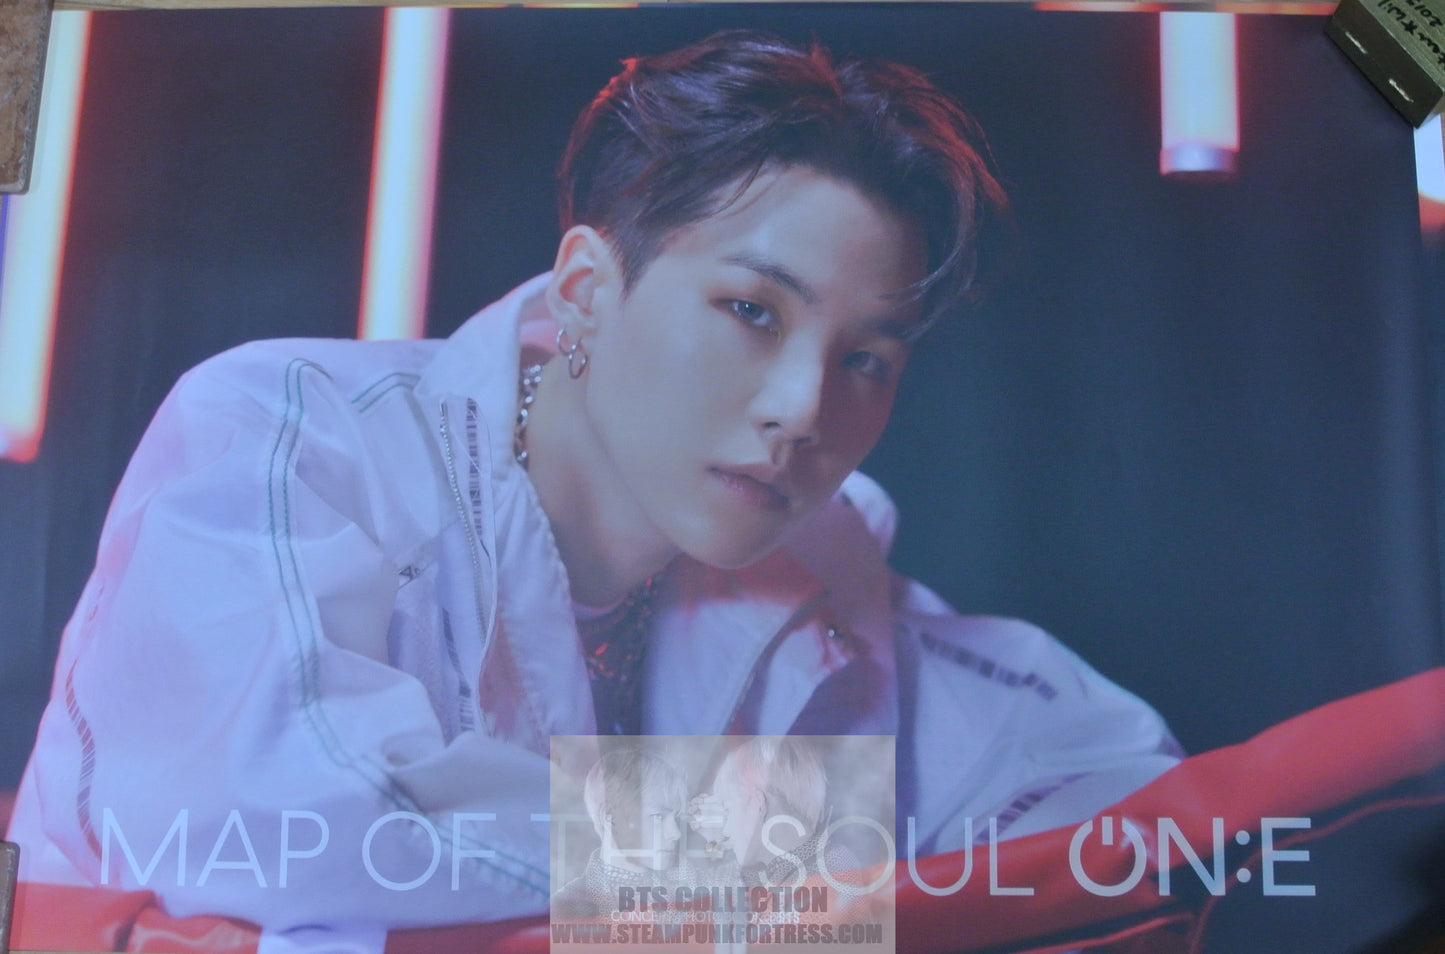 BTS SUGA MIN YOONGI YOON-GI POSTER PHOTO FROM MAP OF THE SOUL ON:E ONE BOOK SPECIAL 2 SET FIRST EDITION LIMITED VERSION NEW OFFICIAL MERCHANDISE 24" X 36"